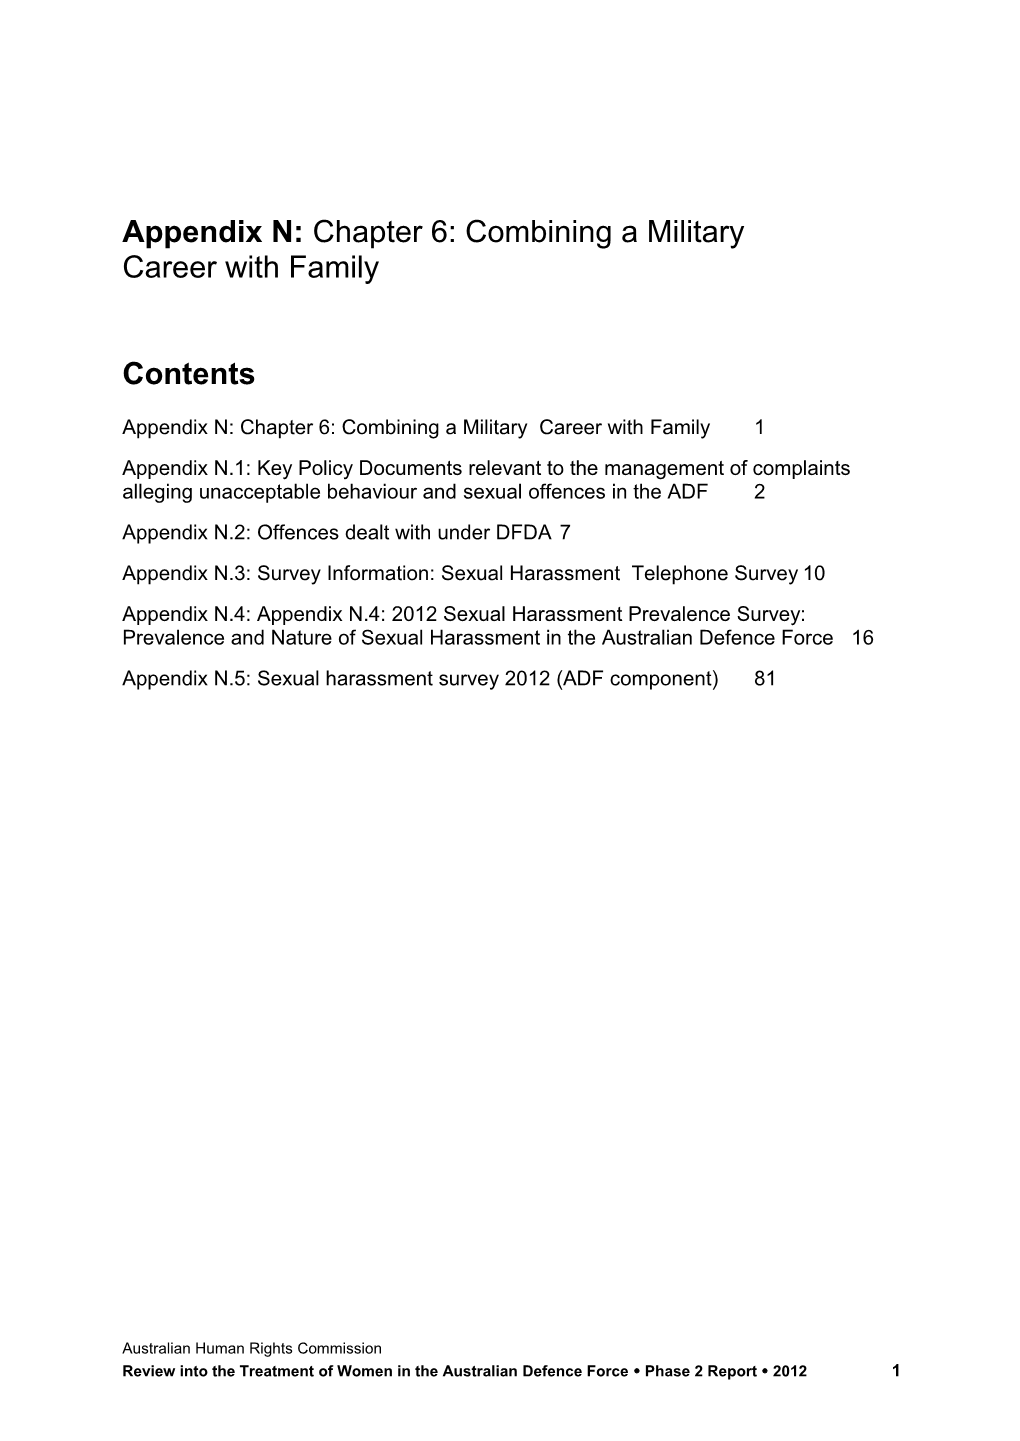 Appendix N:Chapter 6: Combining a Military Career with Family